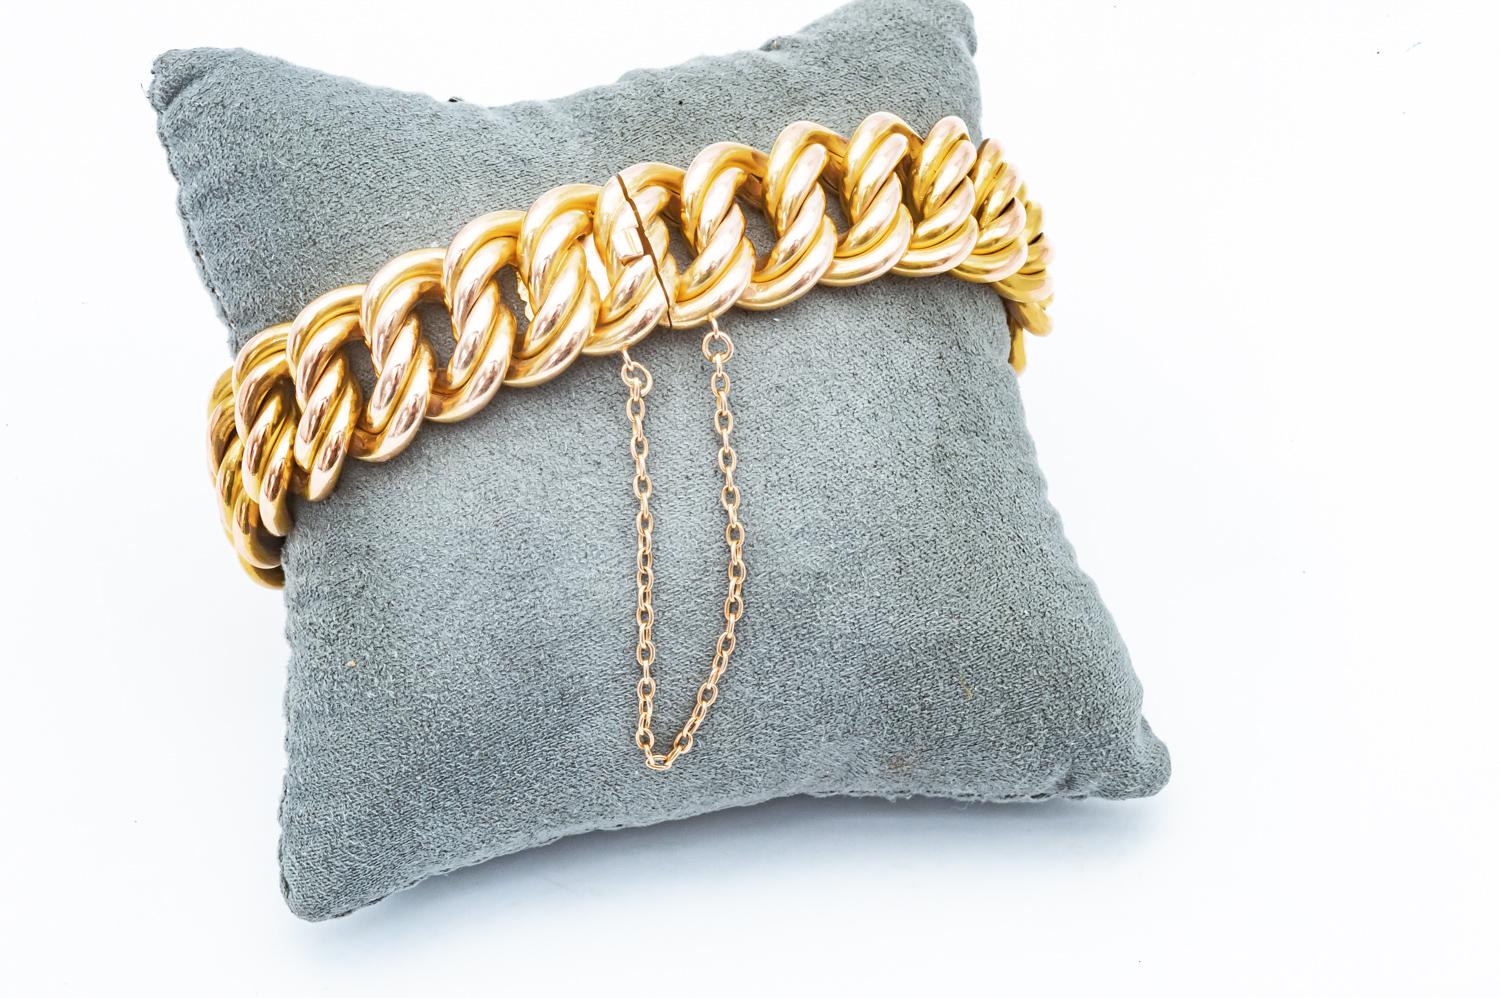 Artisan American Mesh or Armlet Bracelet, in 18K Yellow Gold with Chain